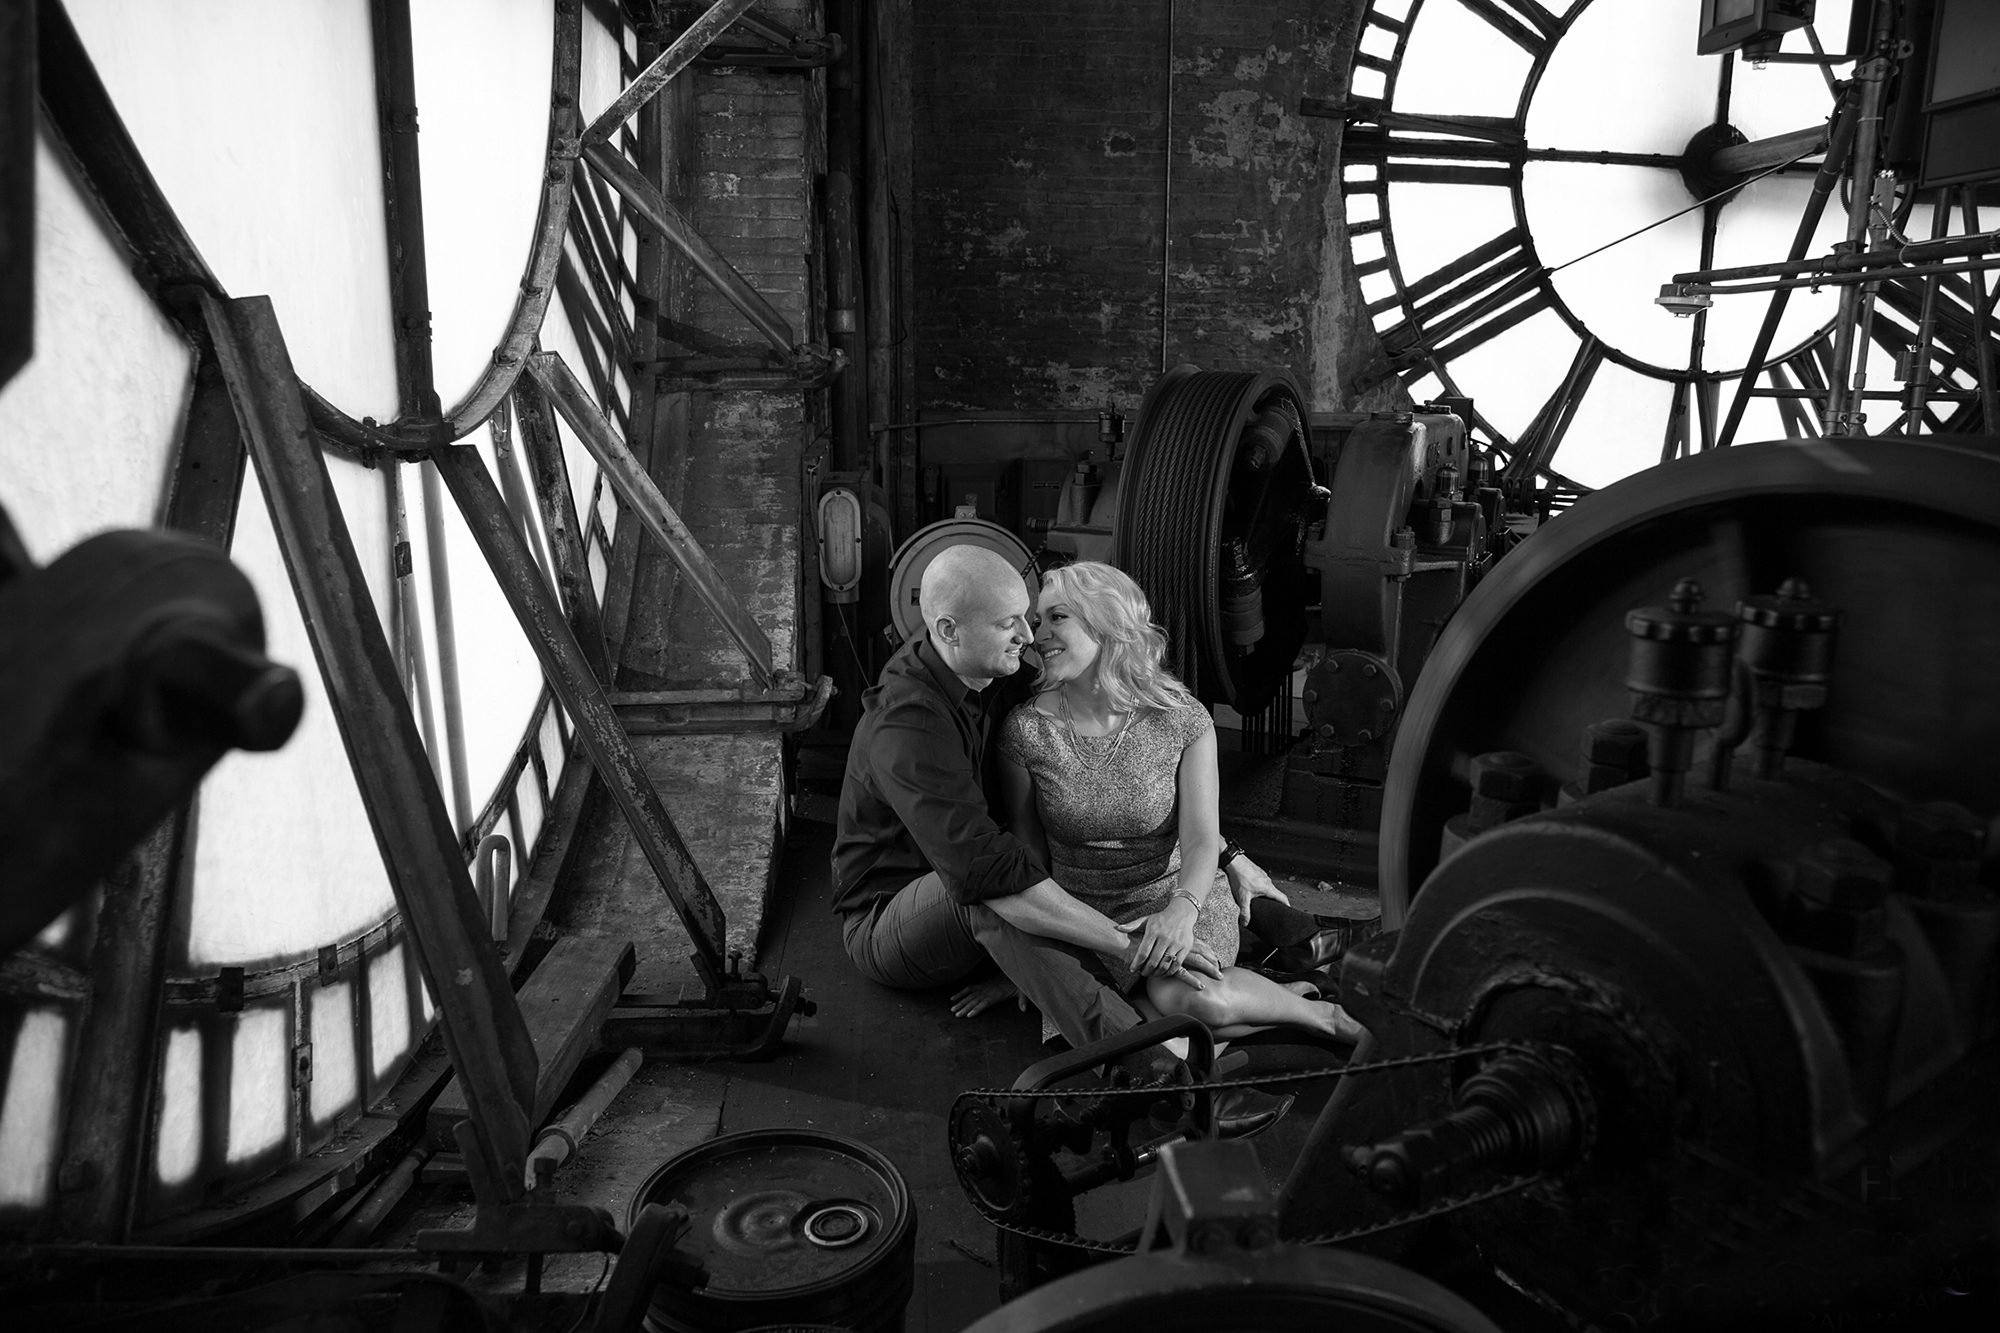 Couple sitting together in front of a clock, enjoying each other's company.